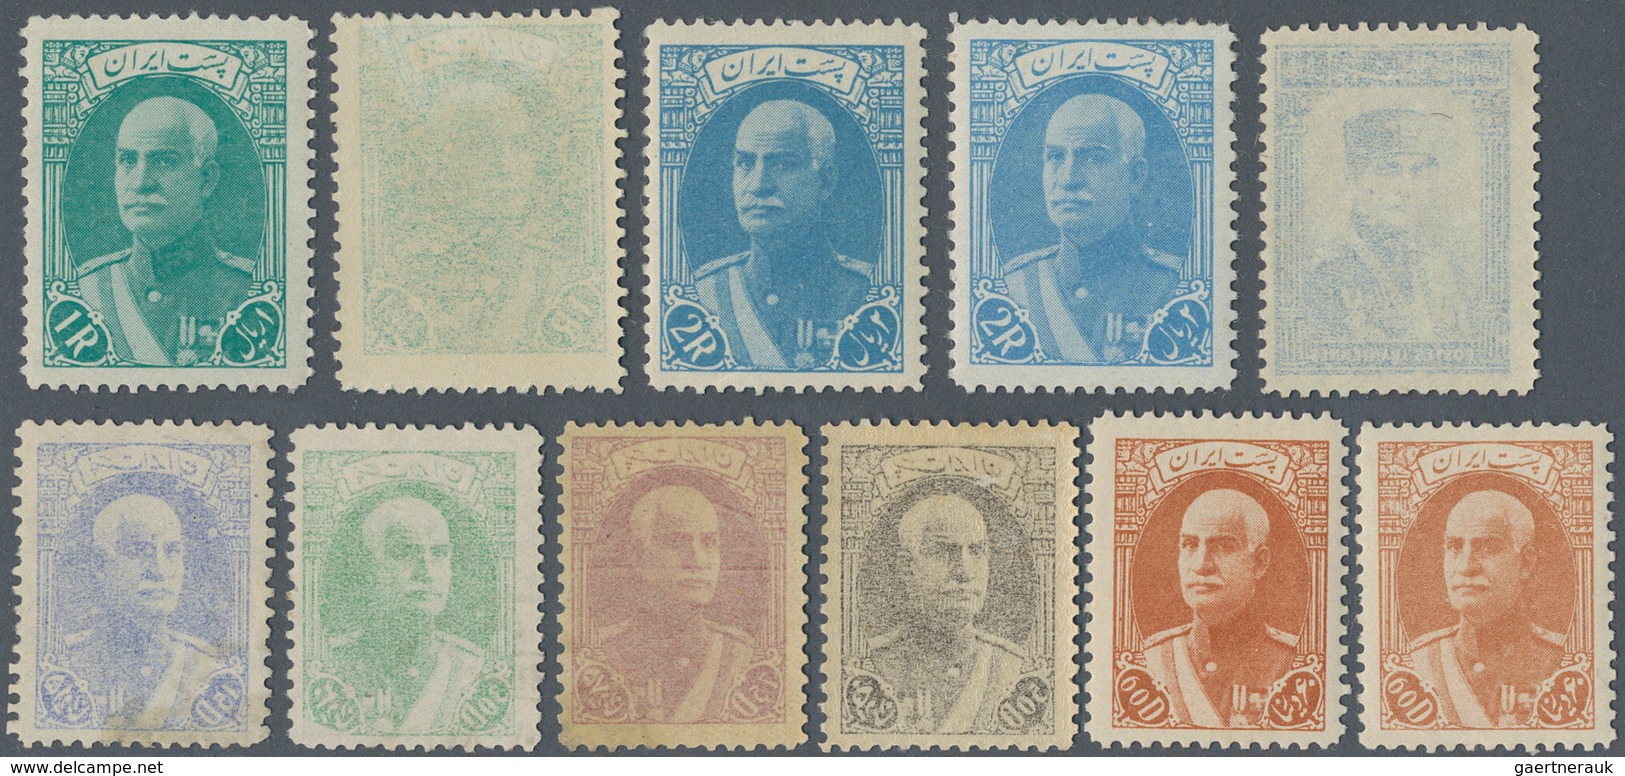 Iran: 1930-40 Ca., 3 Used Stamps And 20 Mint Stamps Showing Color Shades And Off-set Varieties, Fine - Iran